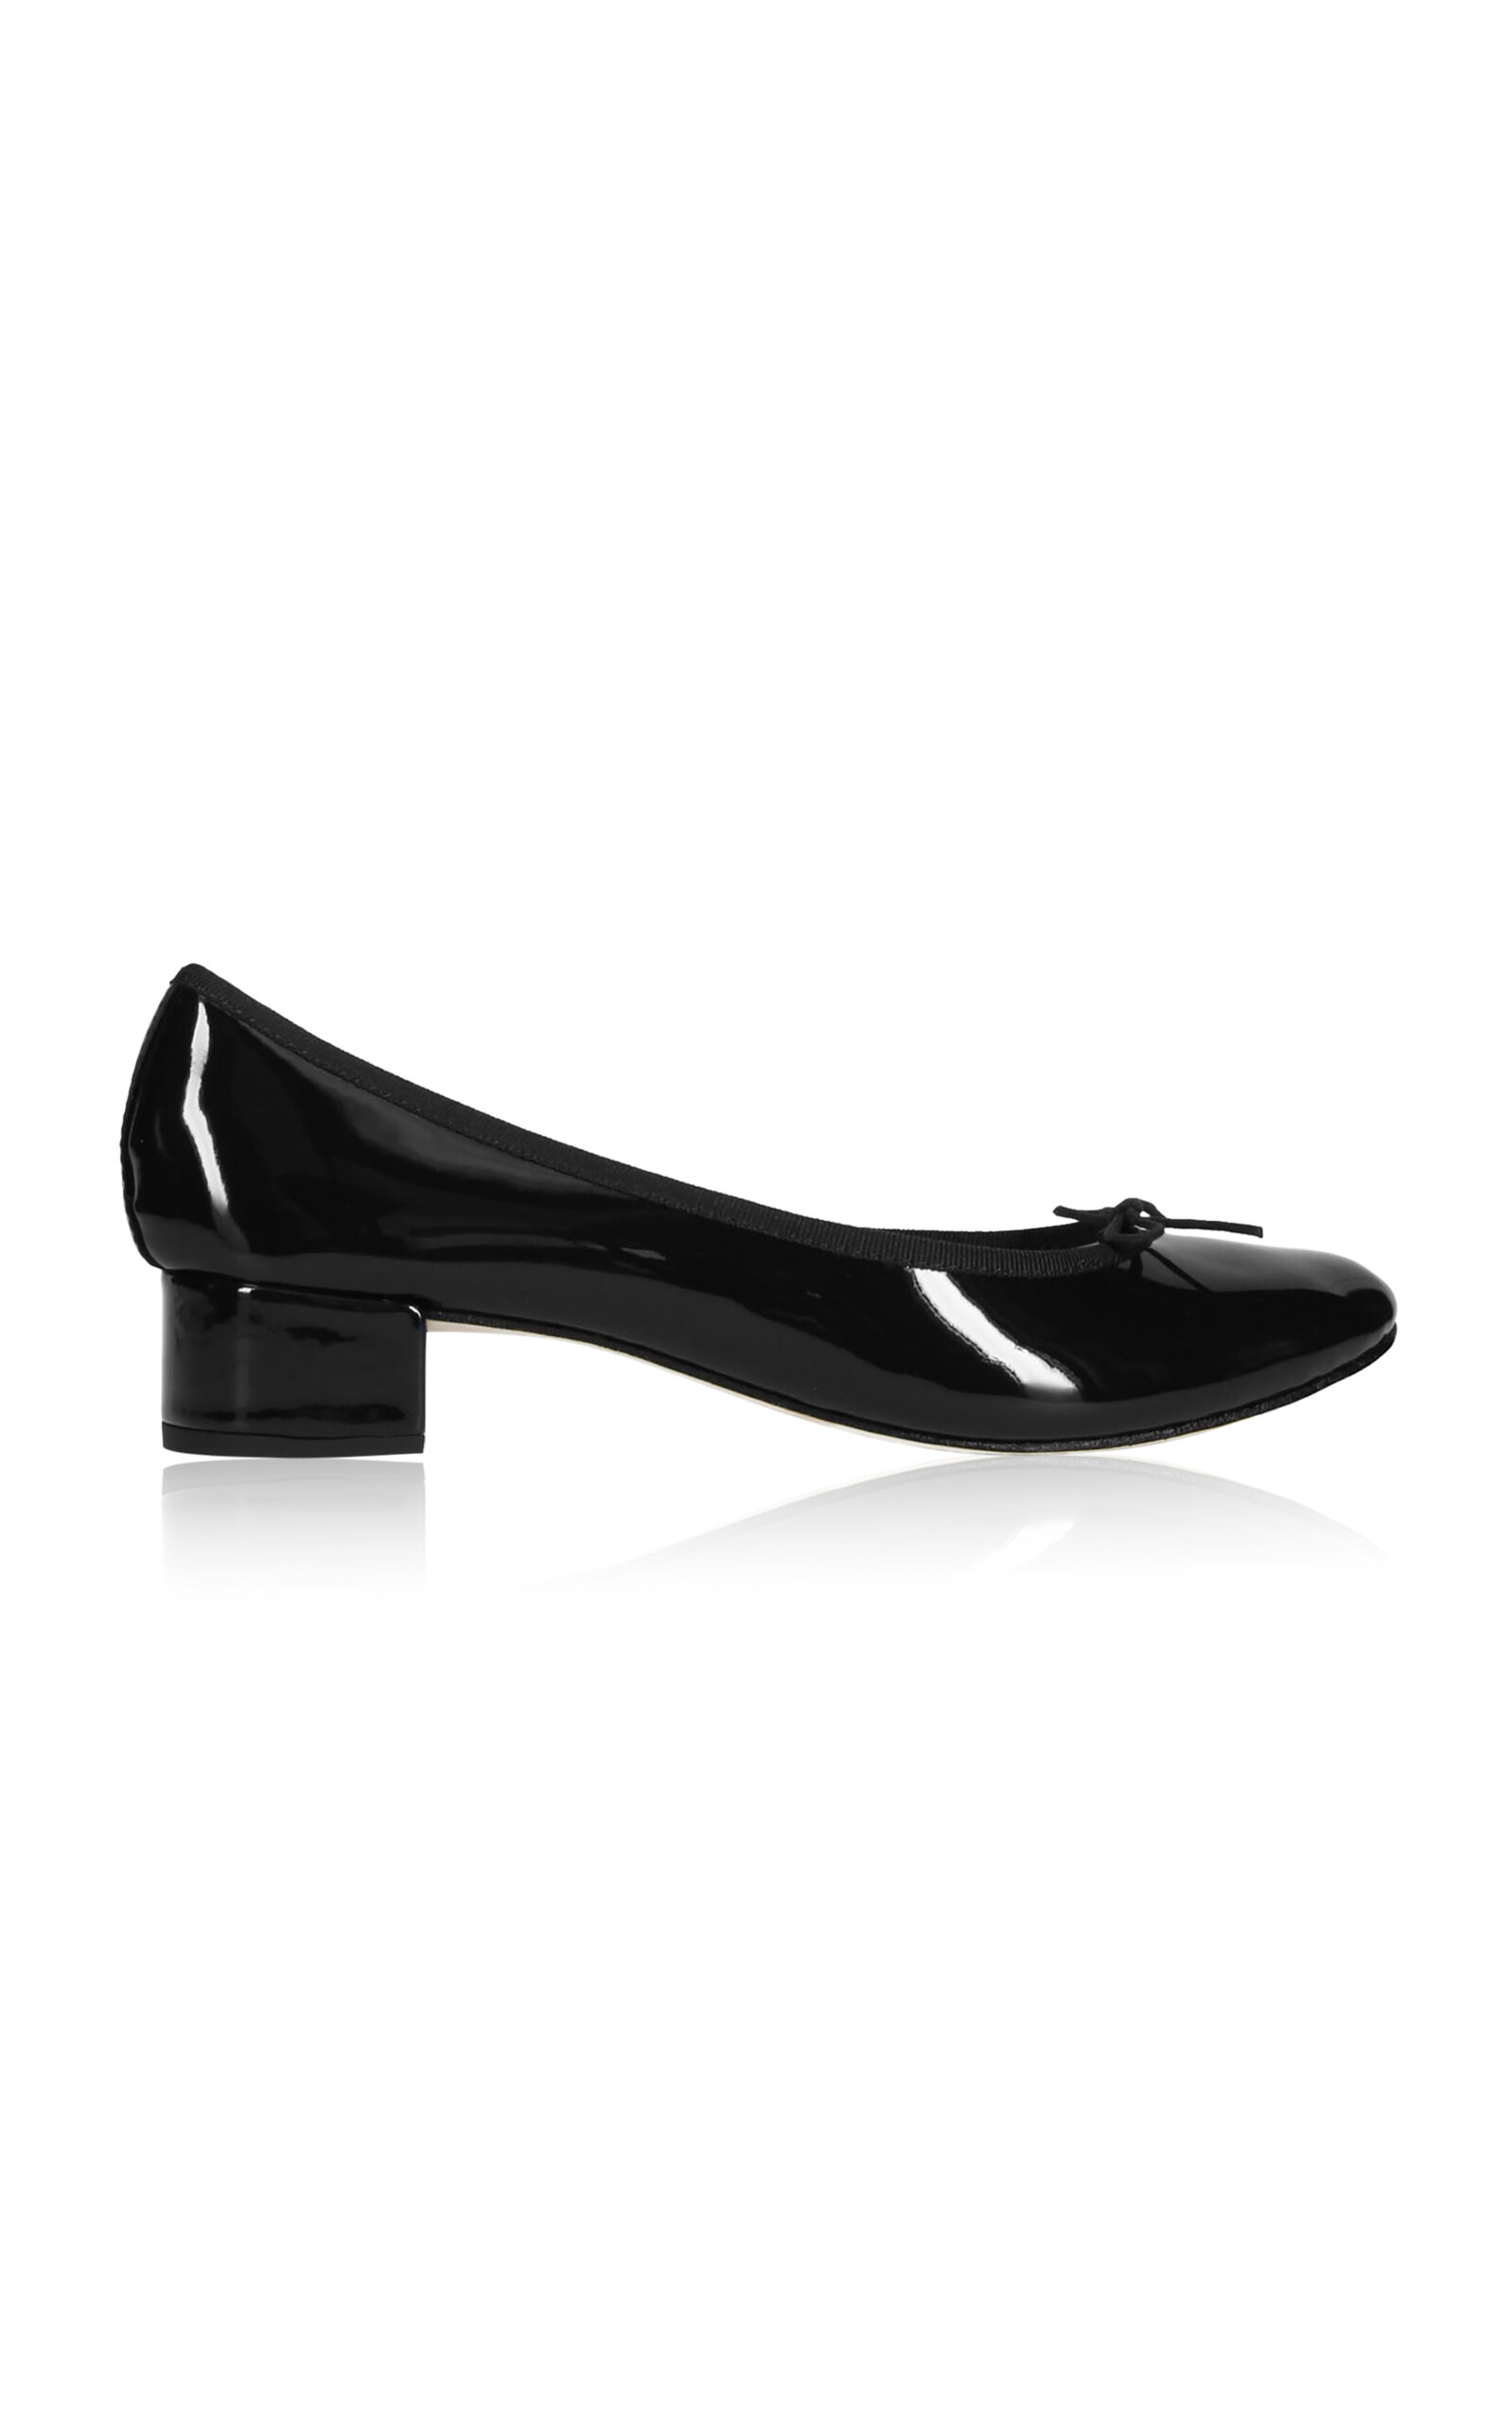 REPETTO CAMILLE PATENT LEATHER KITTEN HEELED BALLERINA PUMPS